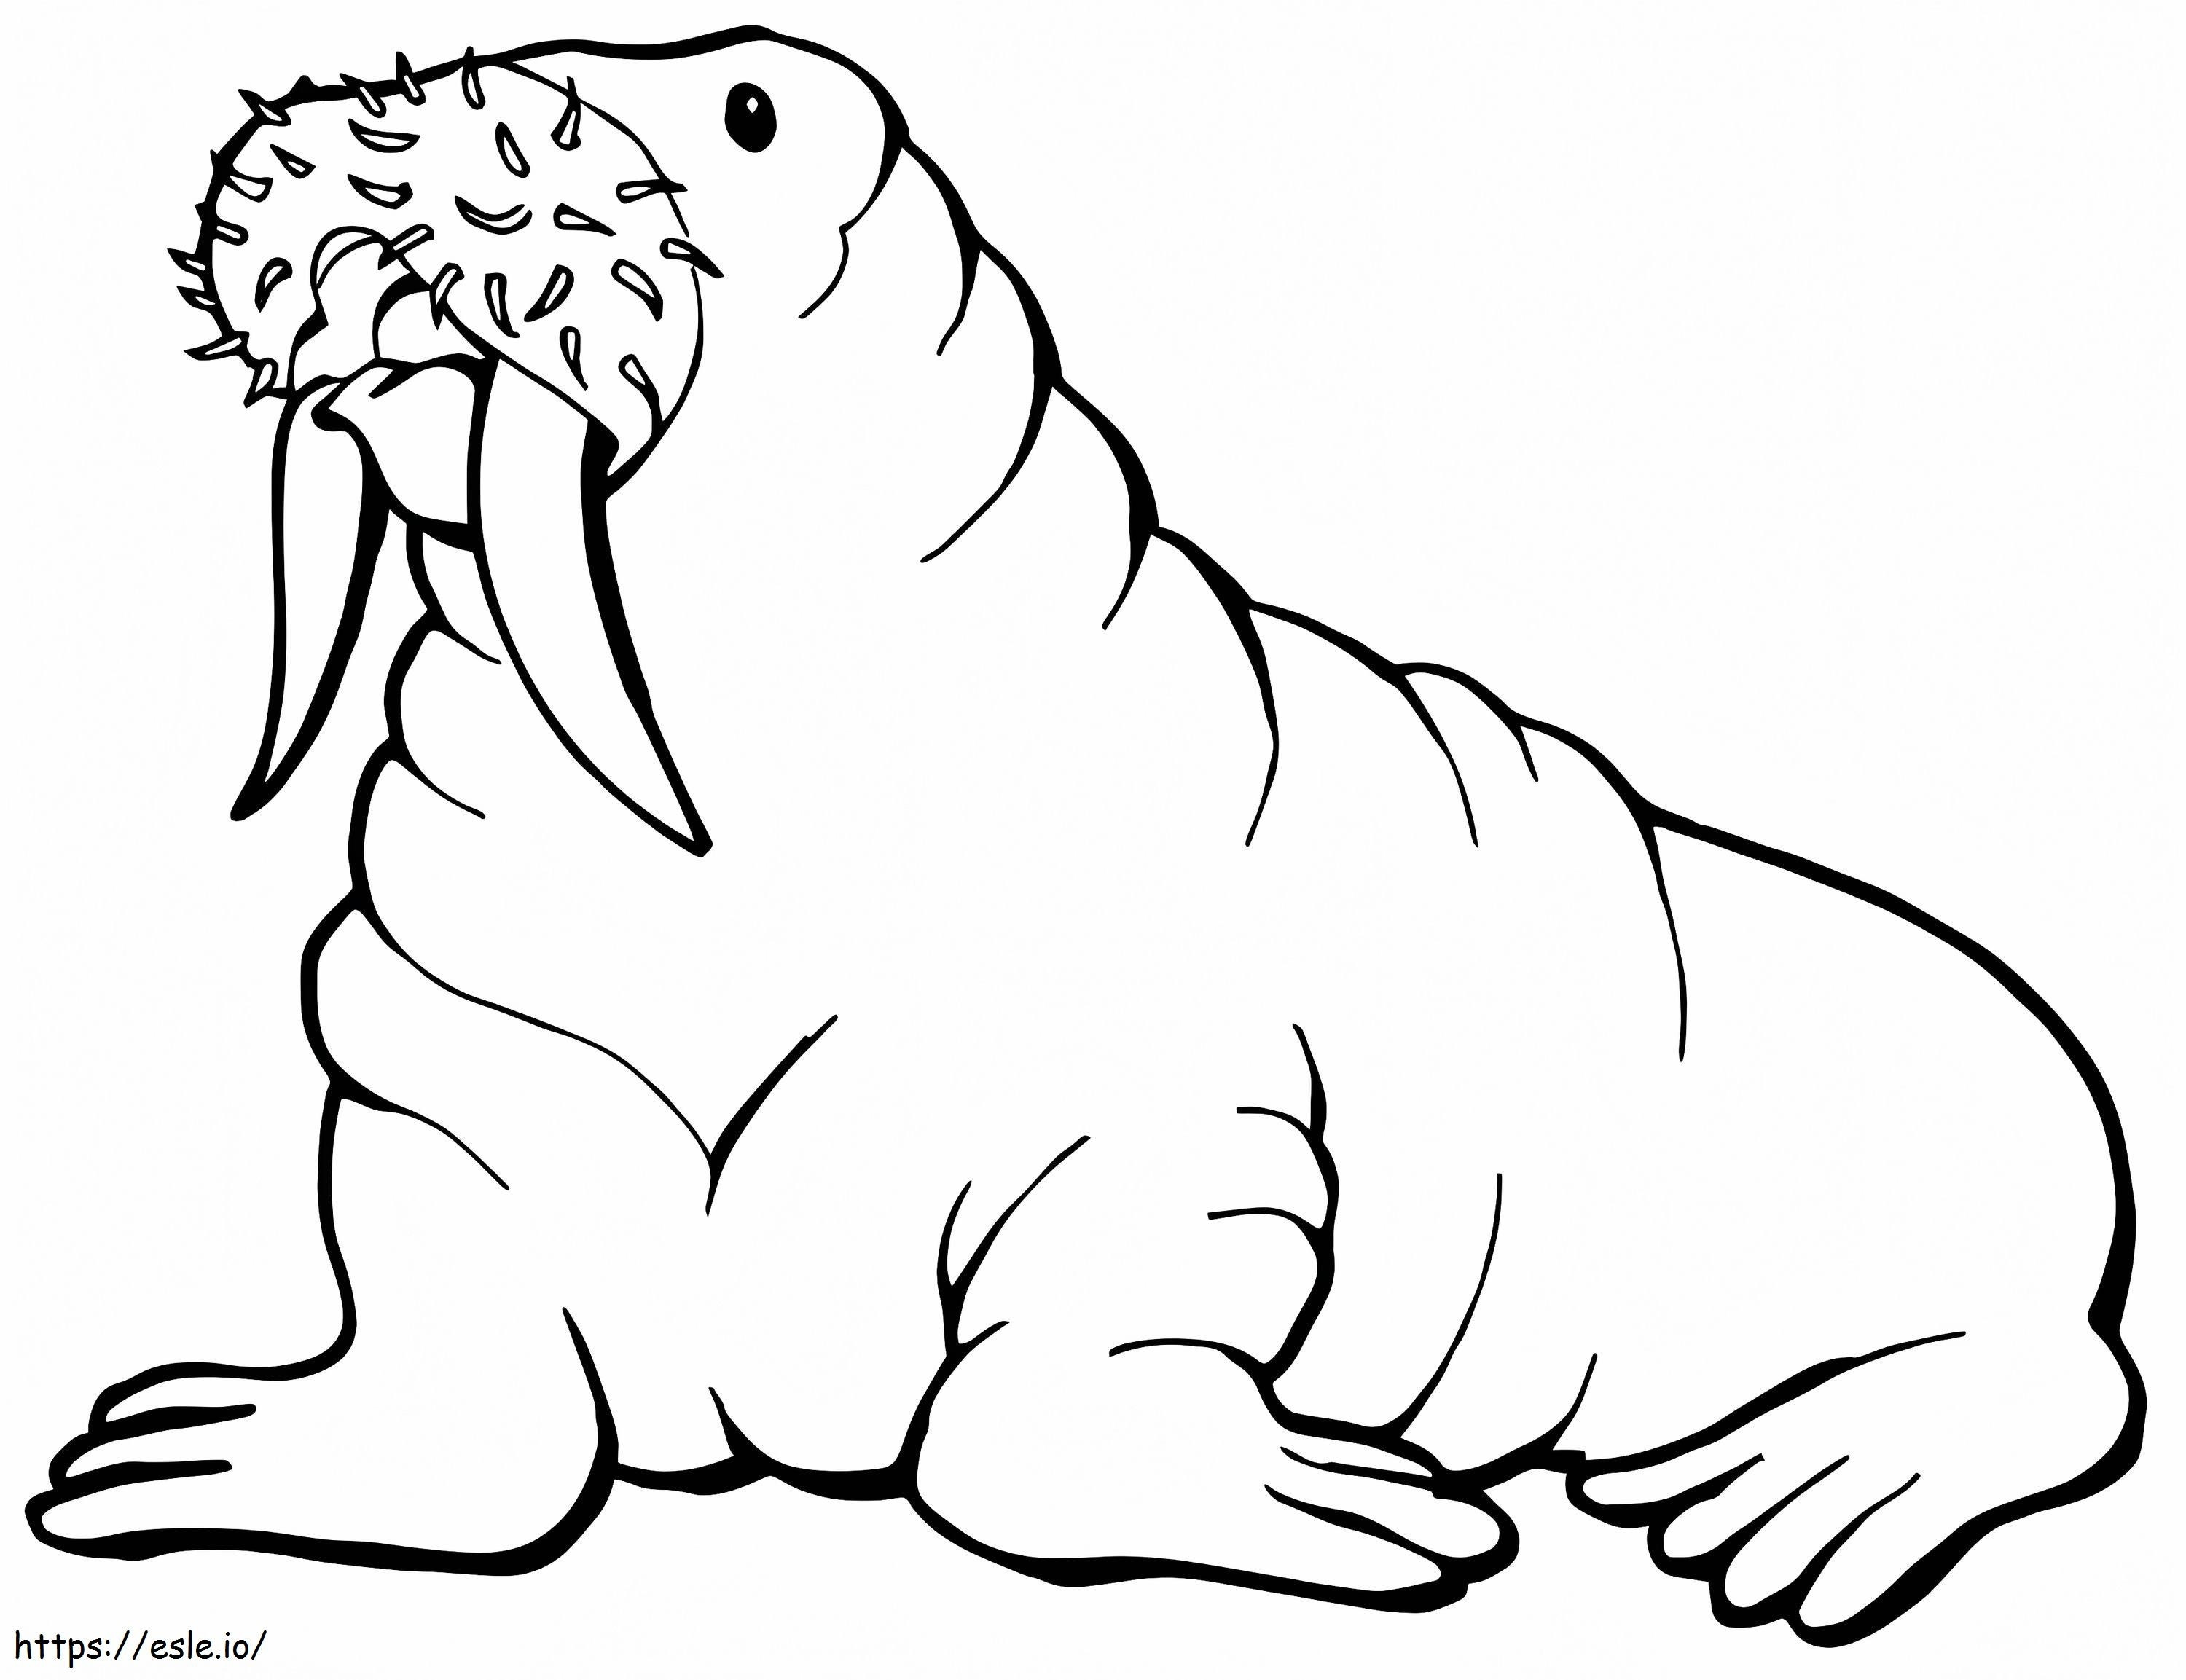 Walrus With Mustache coloring page